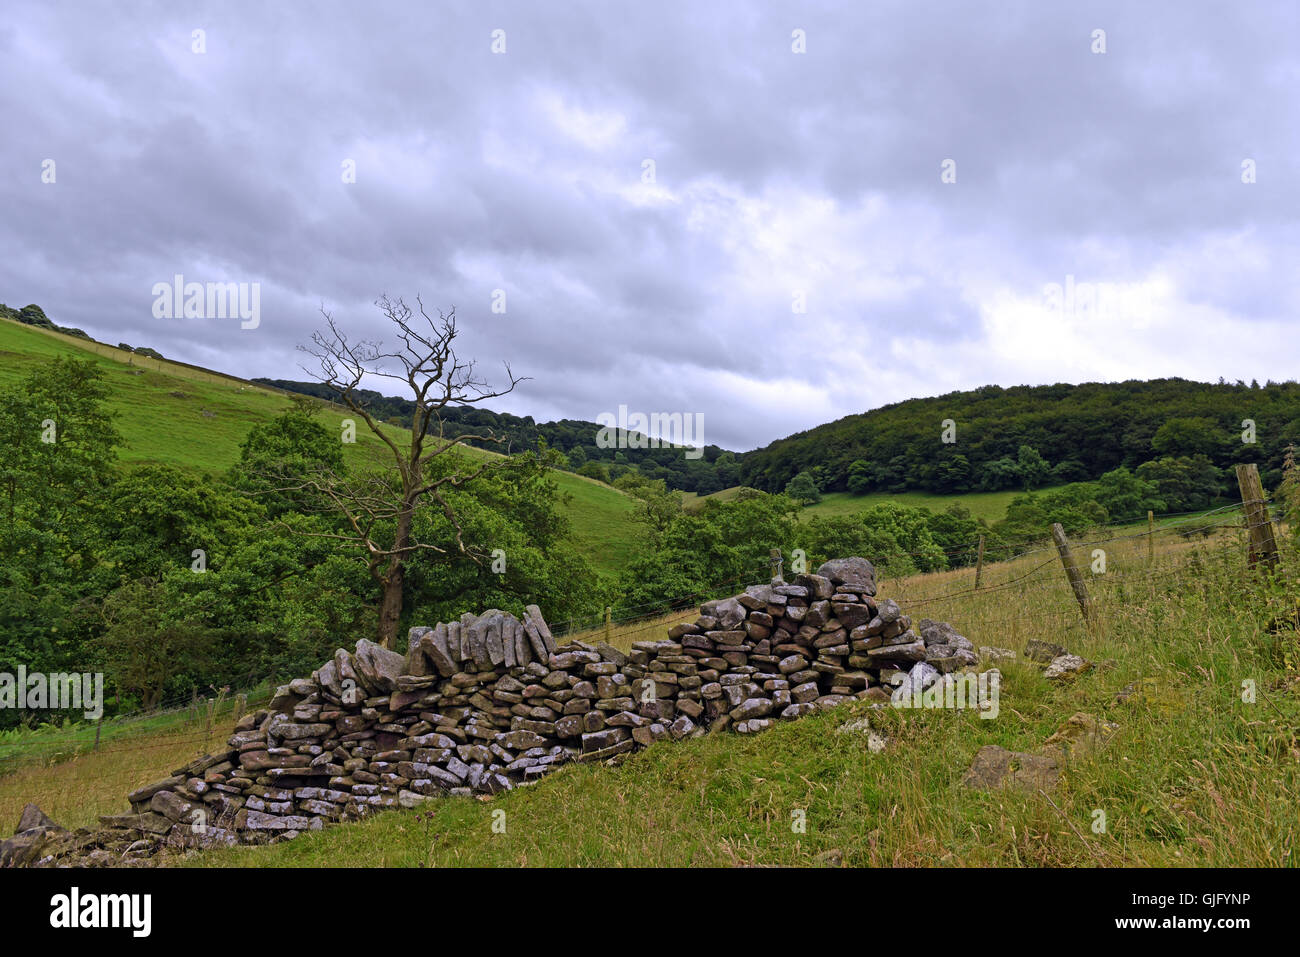 A crumbling dry stone wall in the Peak District National Park with rolling hills in the background under a grey cloudy sky Stock Photo